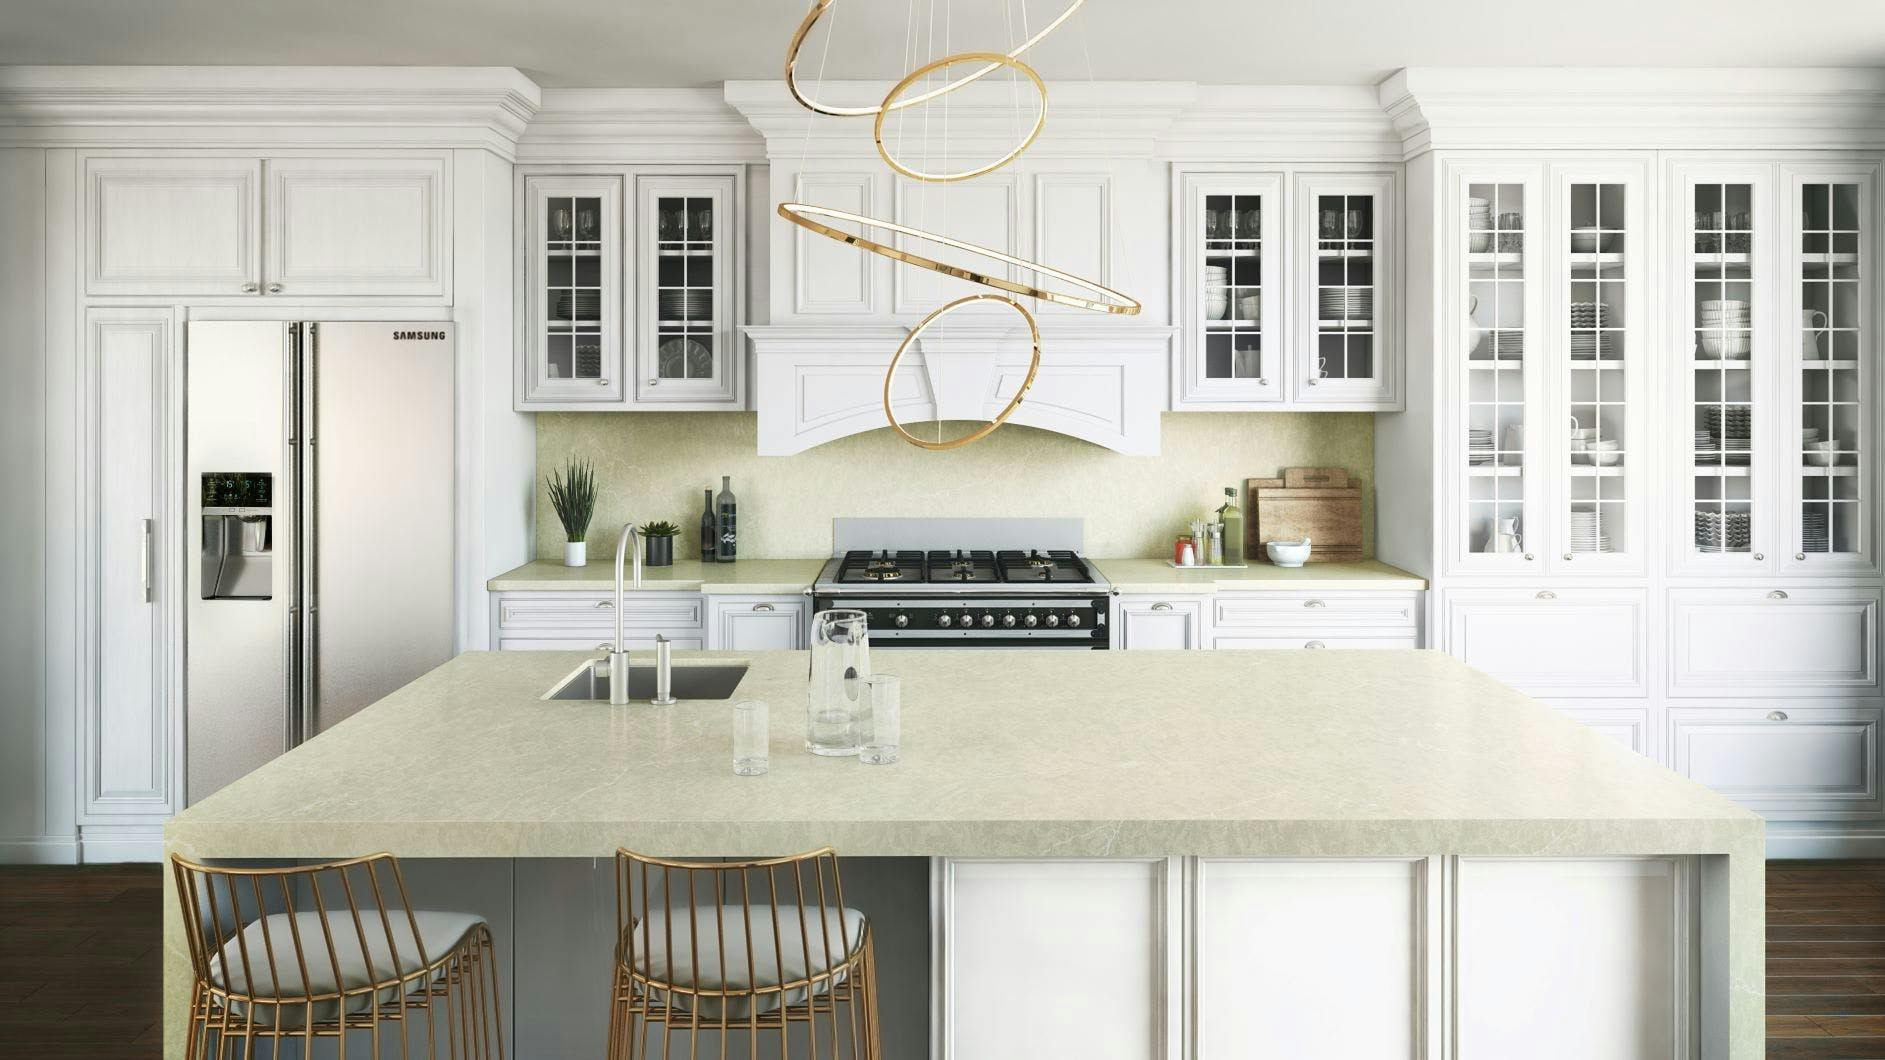 Image 36 of Silestone Silken Pearl Kitchen 1 in New additions to "Eternal", the best-selling Silestone® colour collection - Cosentino